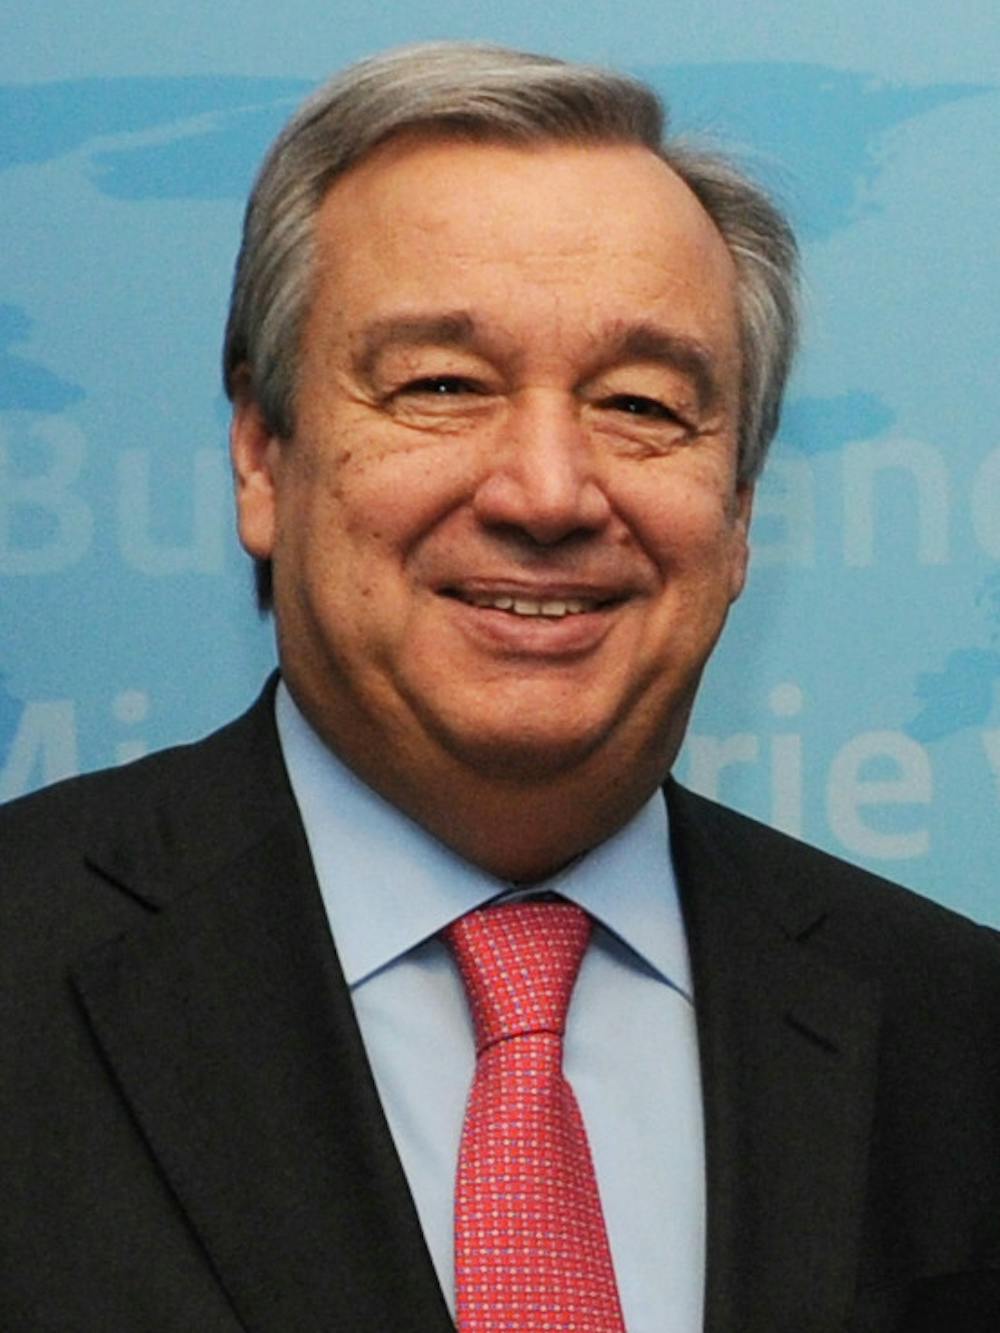 <p><em>United Nations Secretary-General Antonio Guterres has come under fire in recent days after statements made at a meeting of the U.N. Security Council in New York (Photo courtesy of Wikimedia Commons/“</em><a href="https://commons.wikimedia.org/wiki/File:Ant%C3%B3nio_Guterres_2013.jpg" target=""><em>António Guterres 2013</em></a><em>” by Dutch Ministry of Foreign Affairs. January 15, 2013). </em></p>